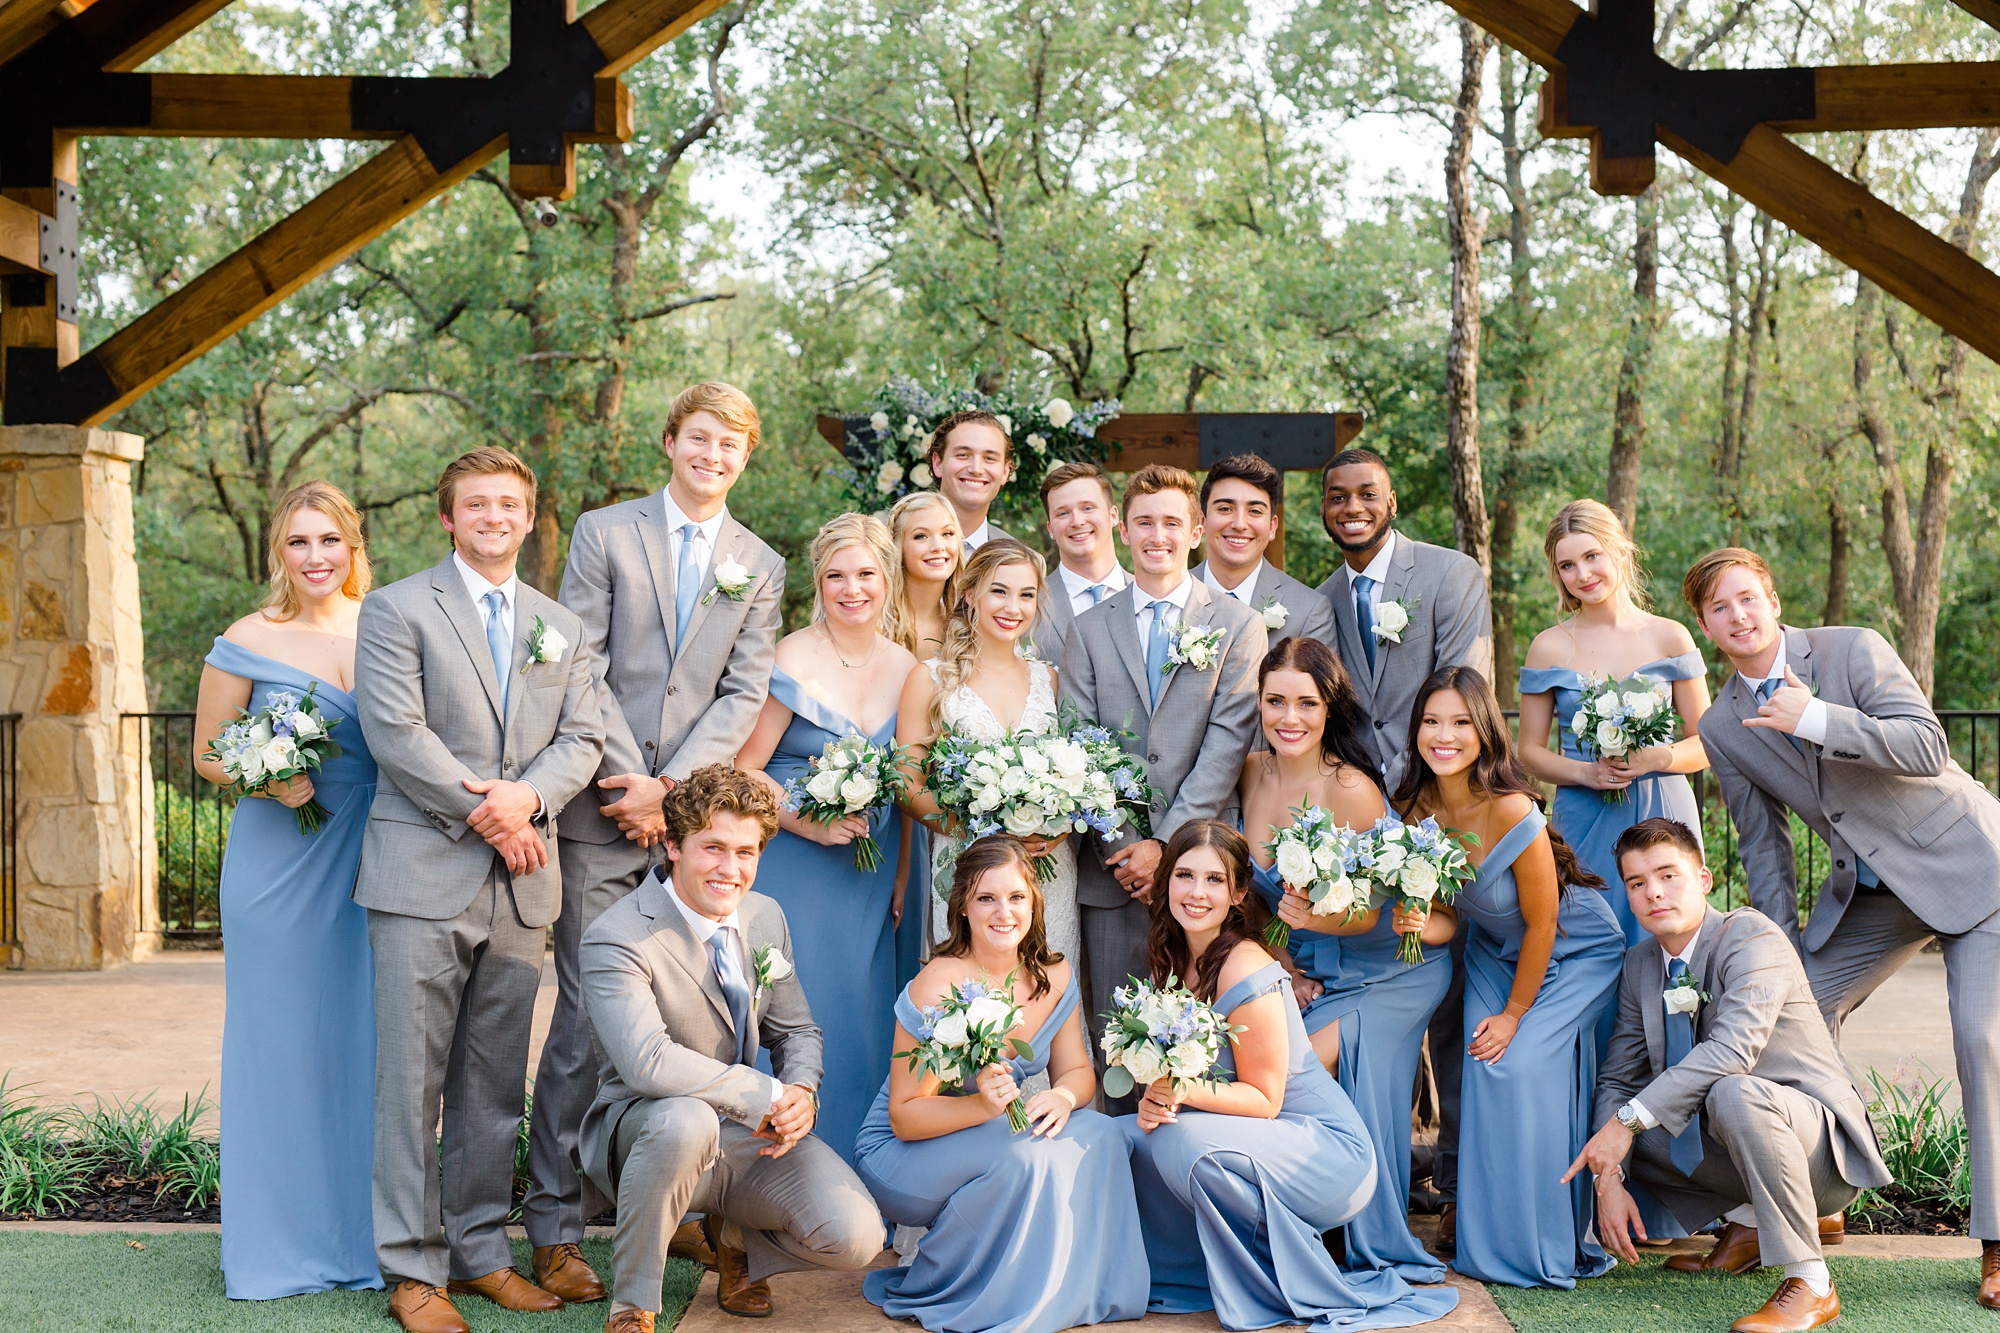 bridal party in grey and light blue poses with newlyweds